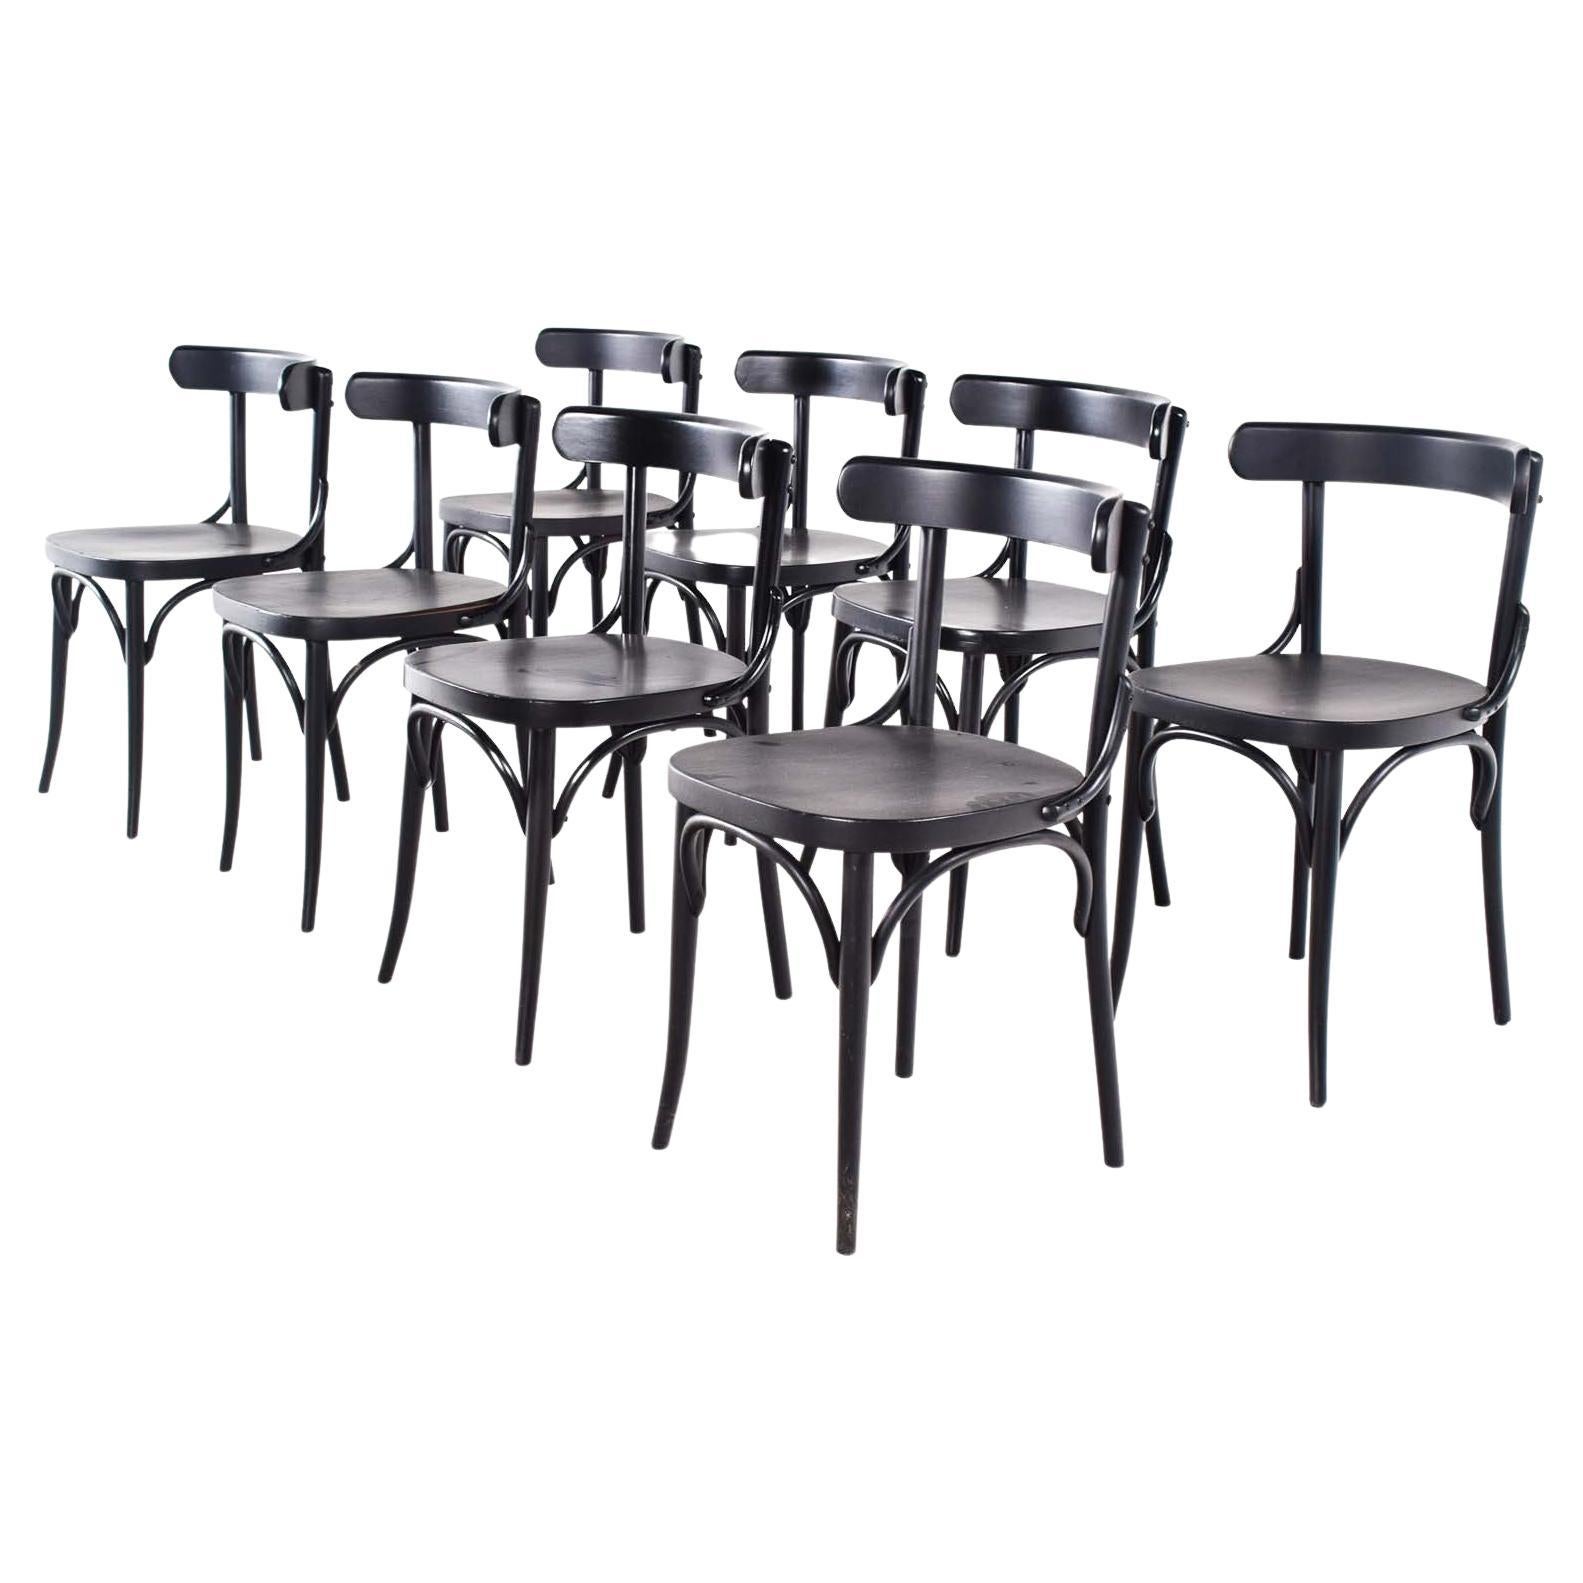 Such a Thonet style lovely chair that dates from the early 20th century. There are many diferent bentwood chairs, mainly destined for the cafes. These 8 chairs are beautifully made with an elegant design, they look fantastic in modern kitchens and